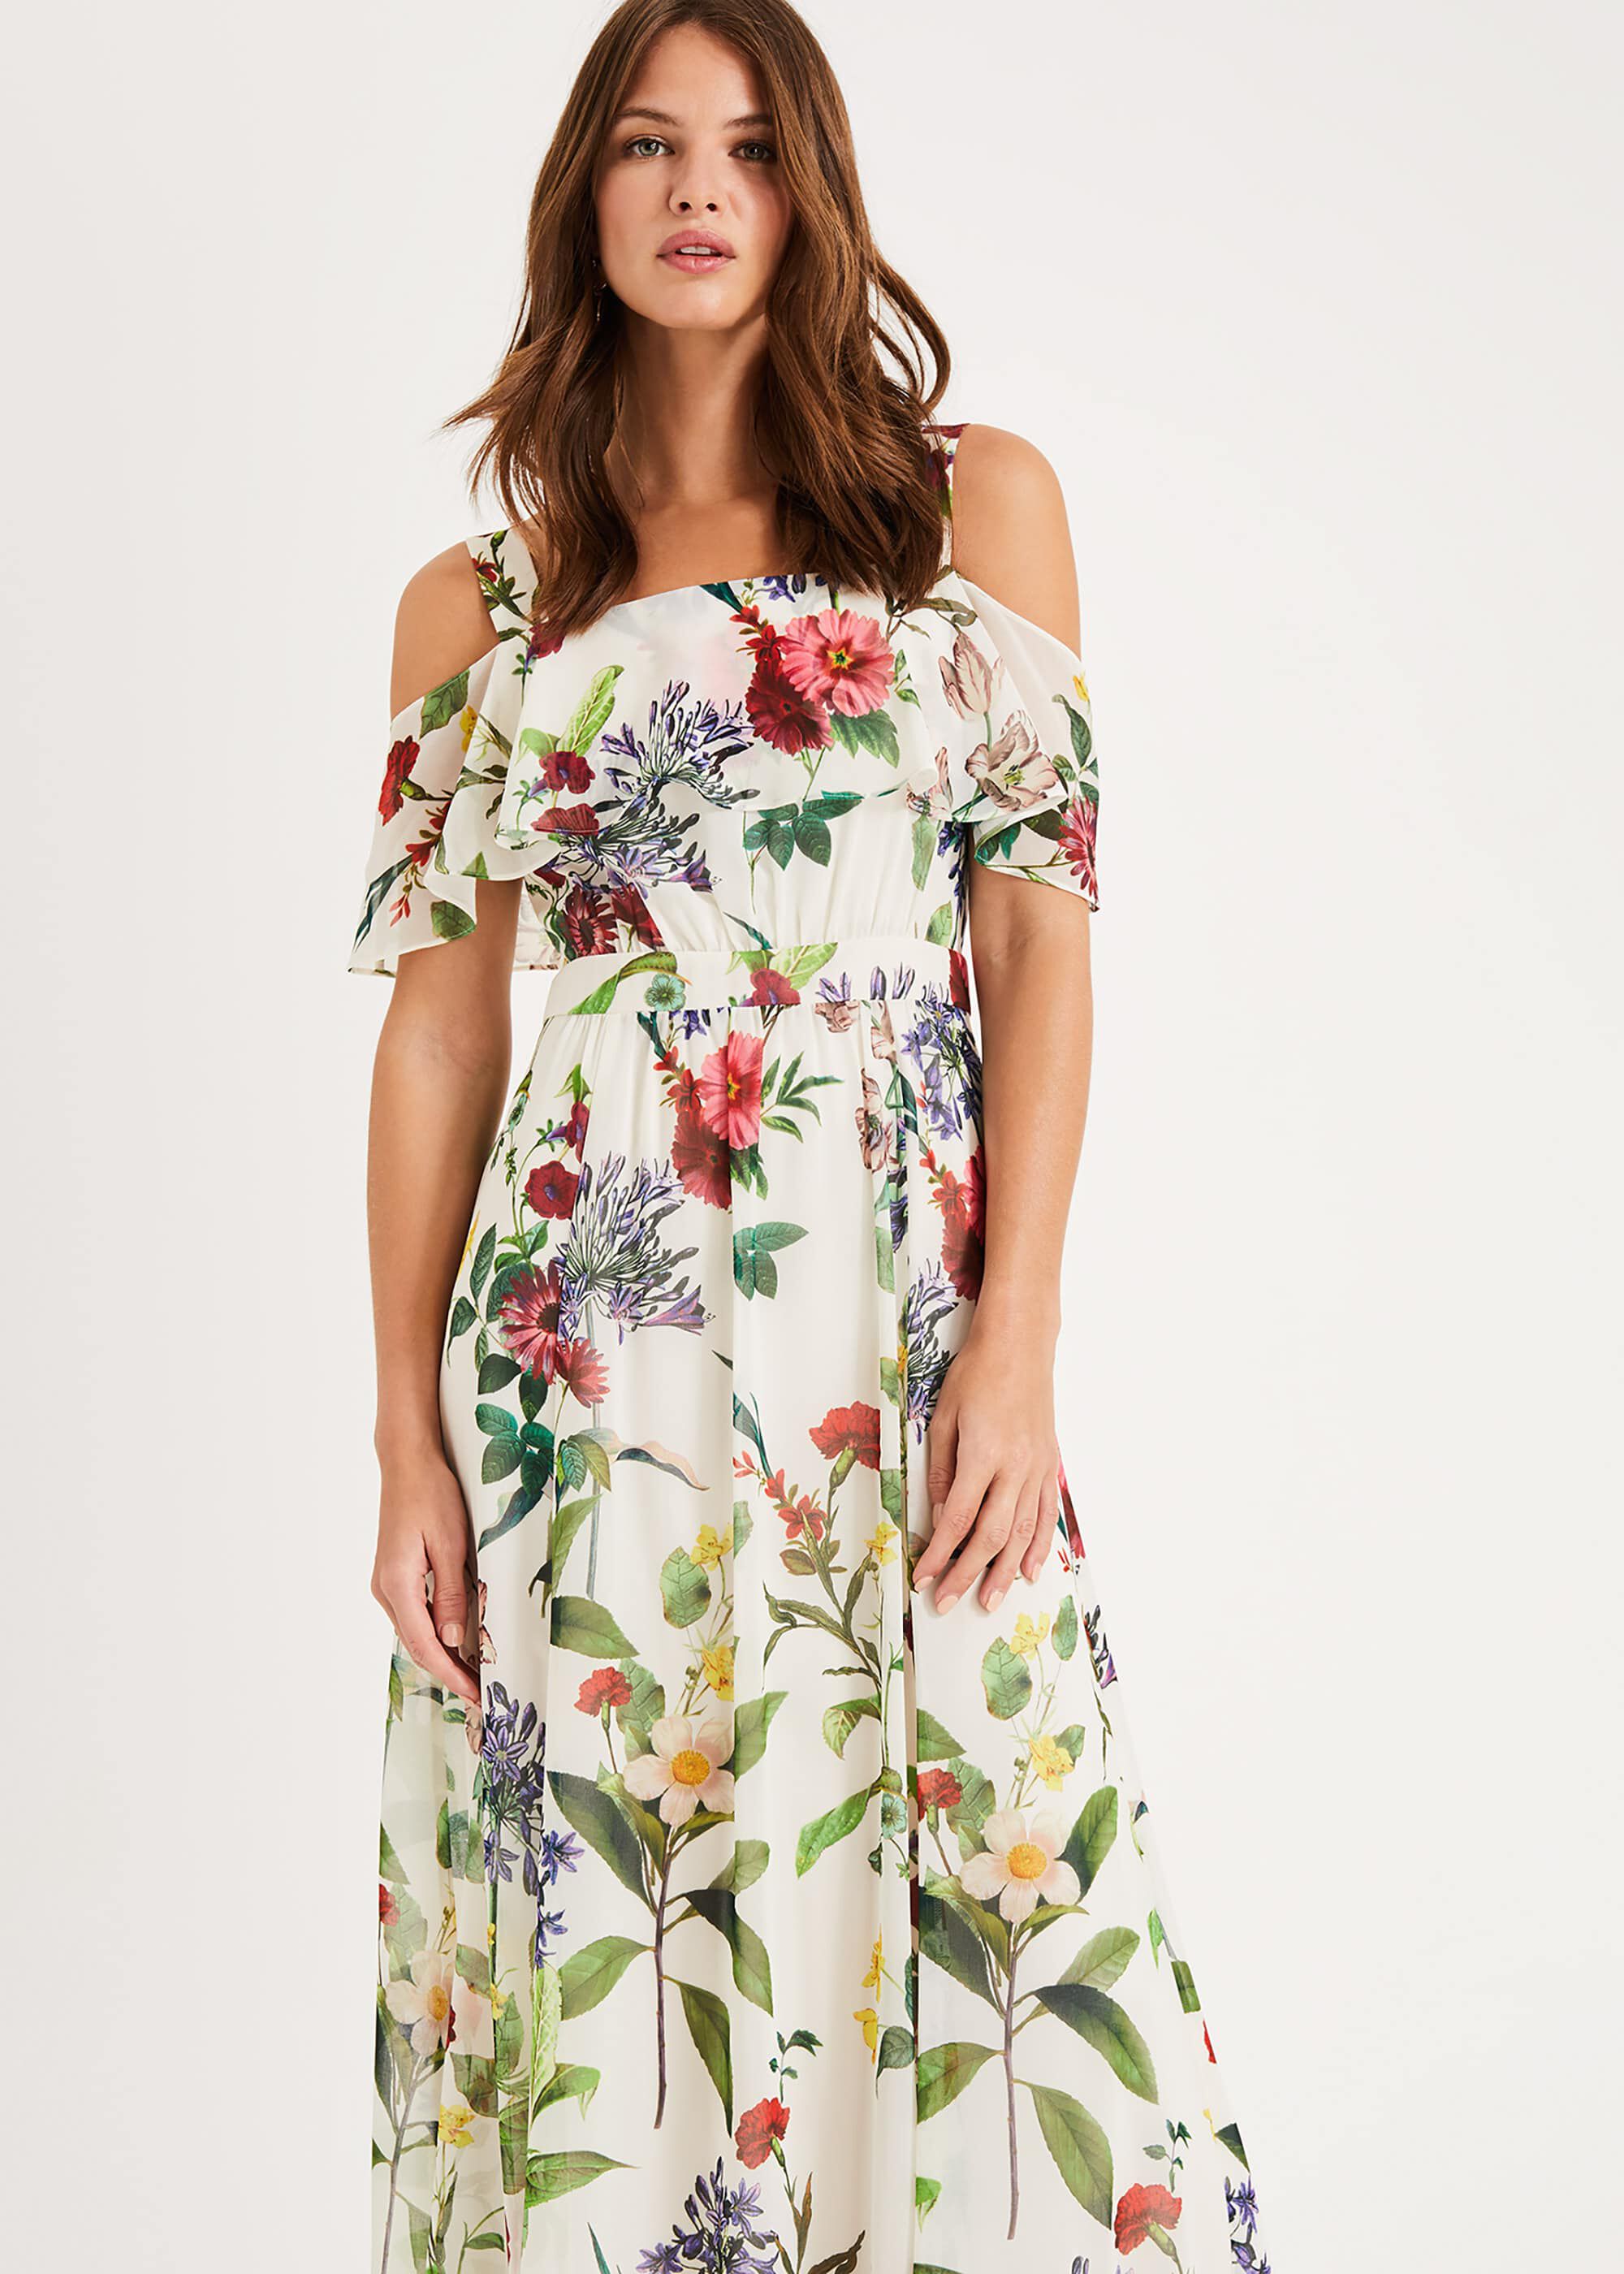 nell floral maxi dress